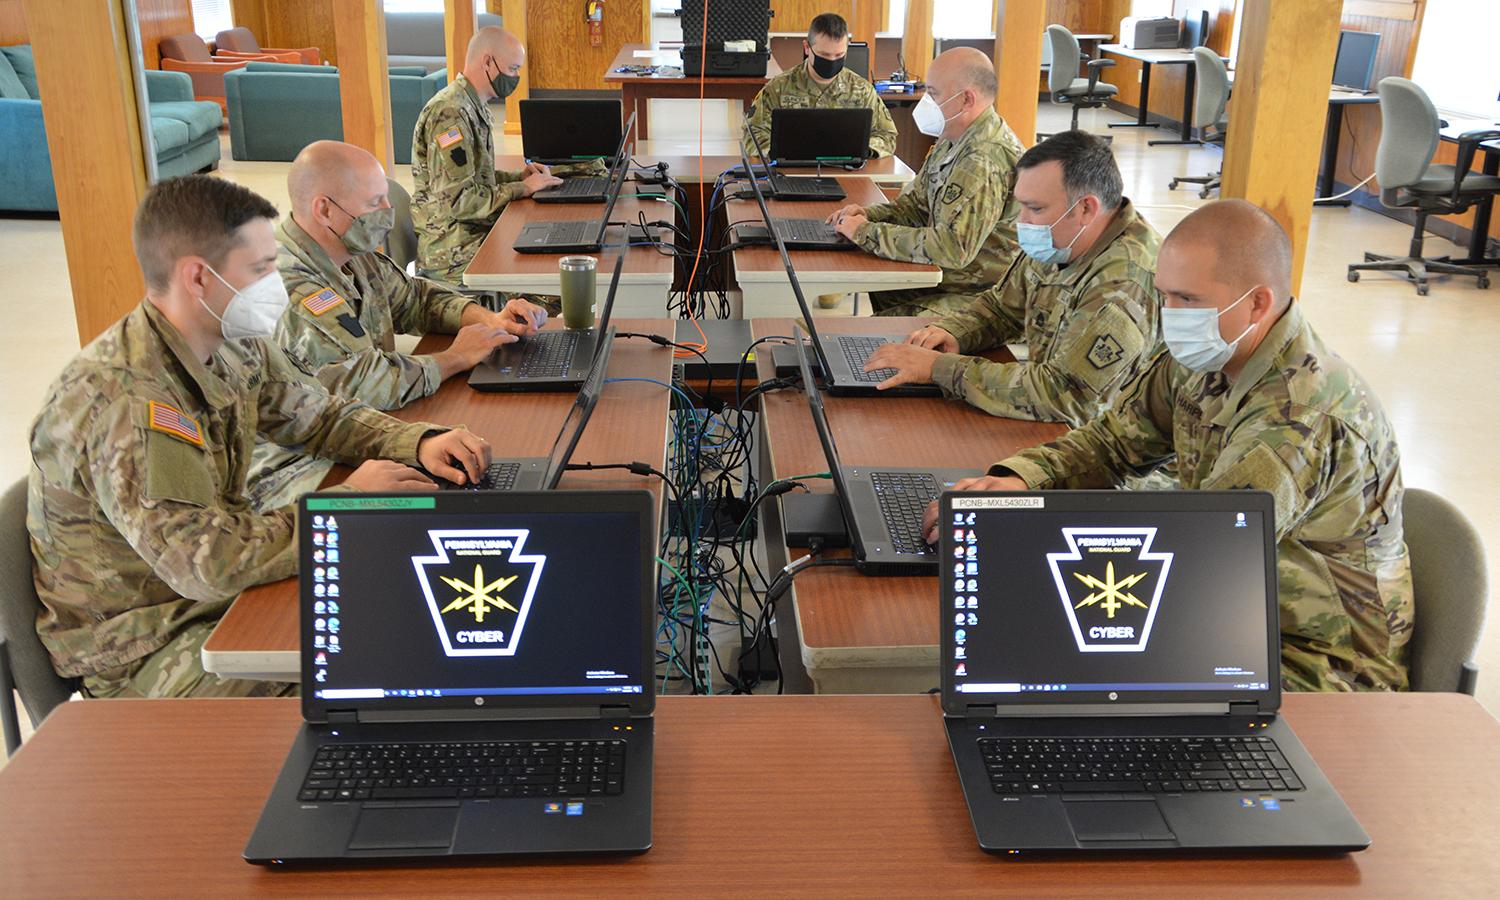 Soldiers participate in a cyberwar exercise